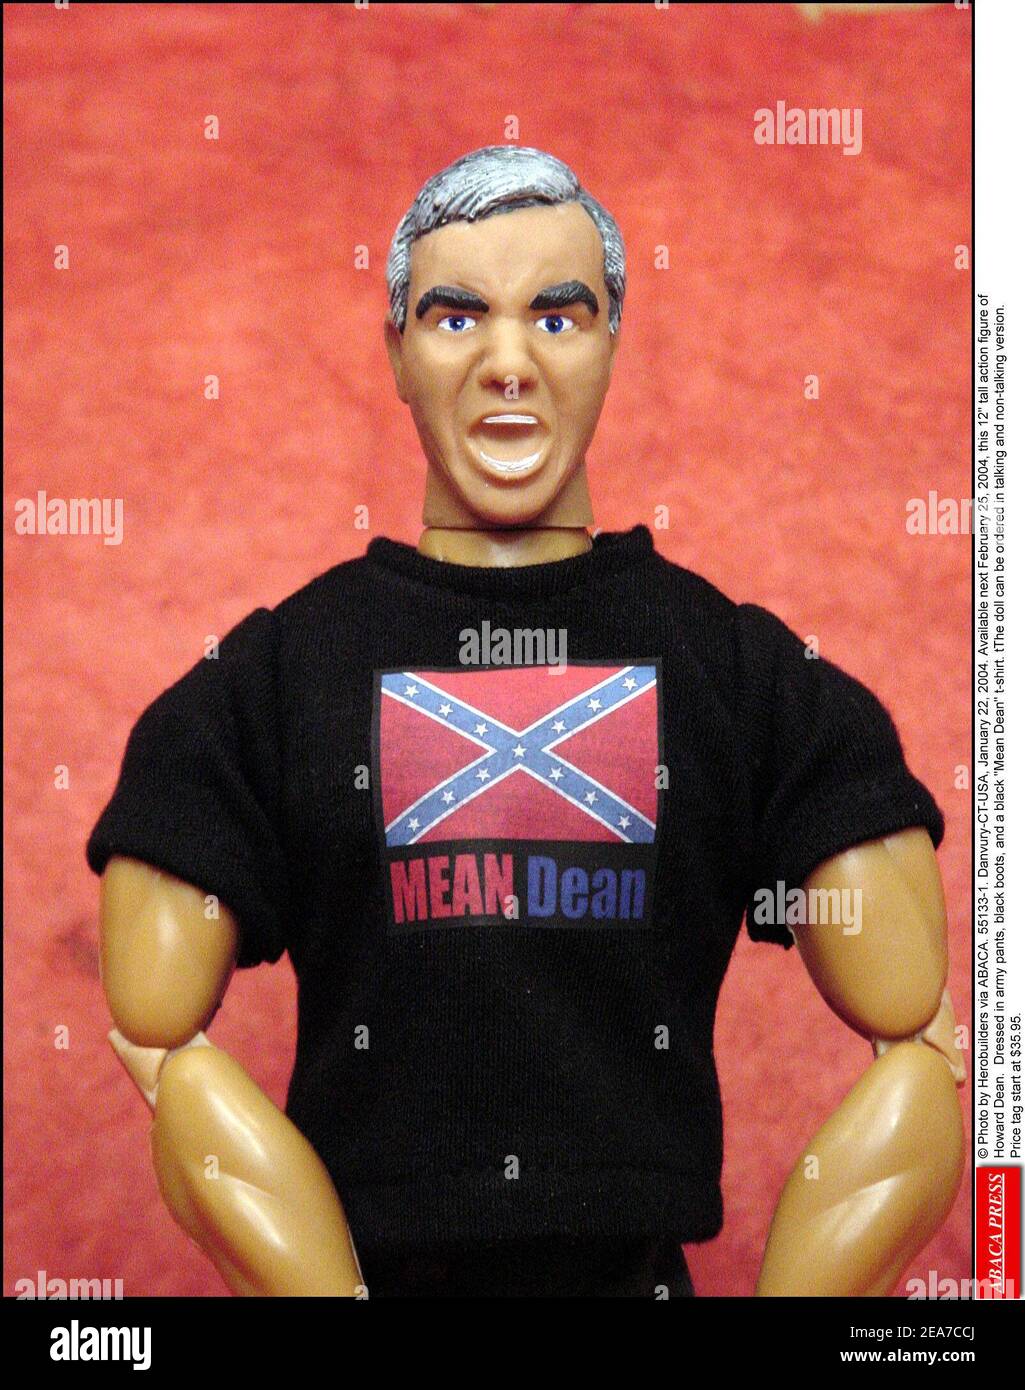 © Photo by Herobuilders via ABACA. 55133-1. Danvury-CT-USA, January 22, 2004. Available next February 25, 2004, this 12 tall action figure of Howard Dean. Dressed in army pants, black boots, and a black Mean Dean t-shirt. The doll can be ordered in talking and non-talking version. Price tag start at $35.95. Stock Photo